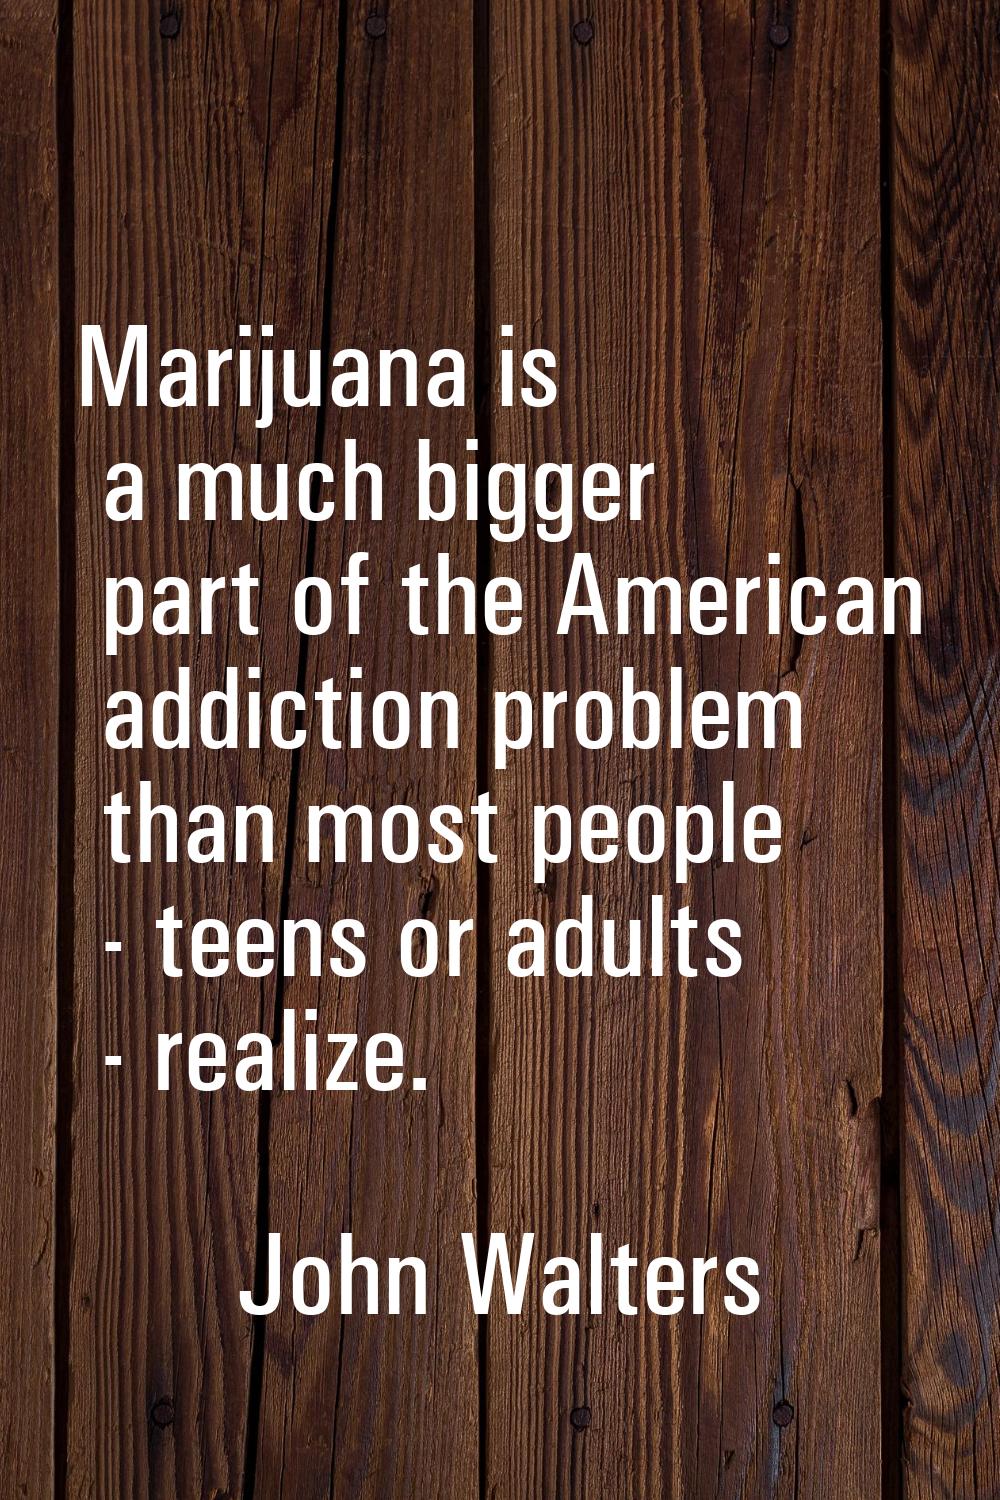 Marijuana is a much bigger part of the American addiction problem than most people - teens or adult